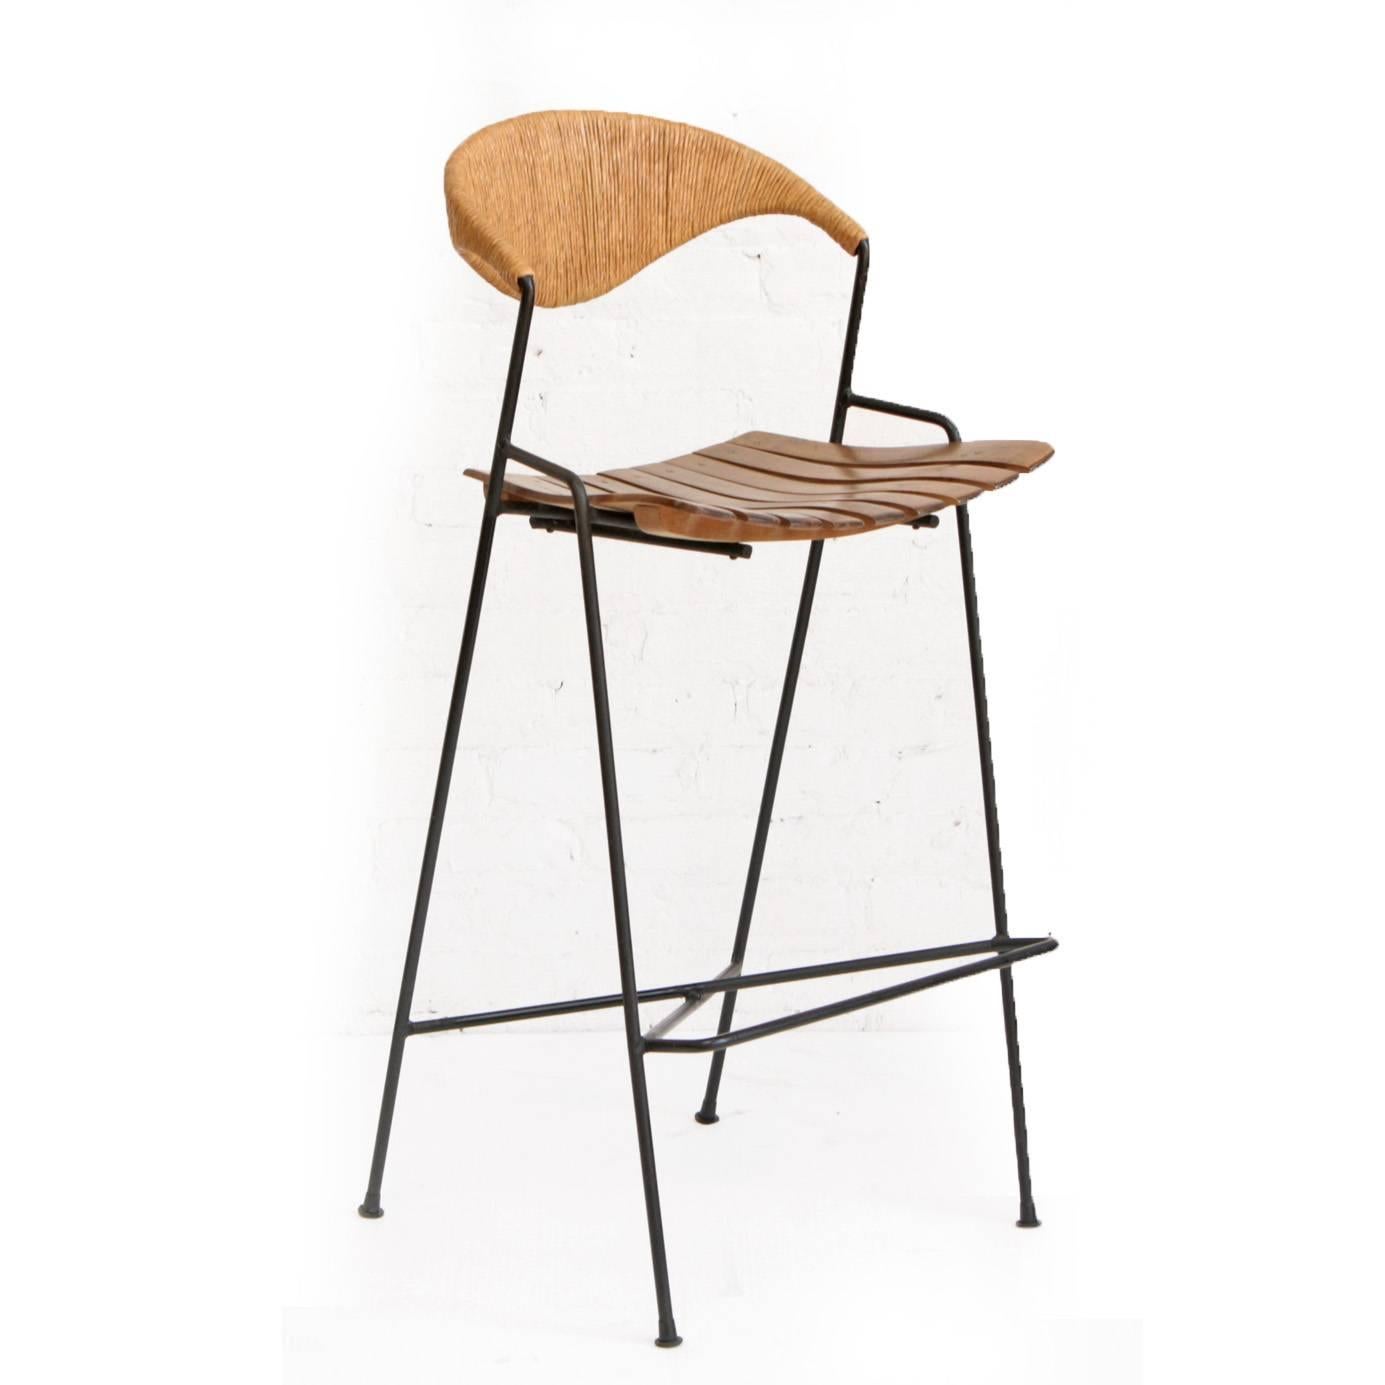 Set of four bar stools by American Mid-Century Modern designer Arthur Umanoff. Minimalist wrought iron frames with wood slat seats and wrapped paper cord backrests.